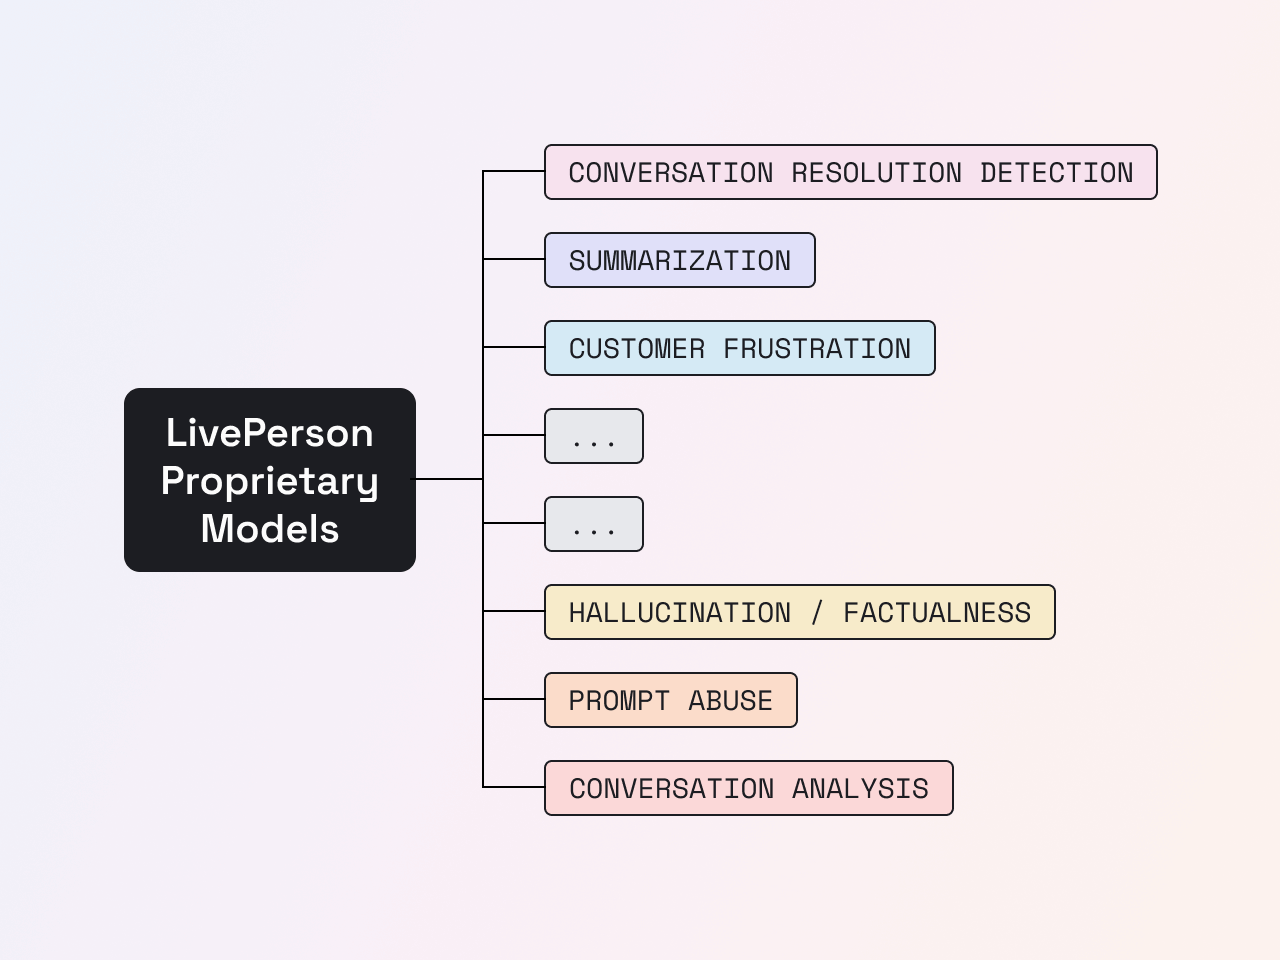 endpoints of foundation models using LivePerson's large language models as a basis